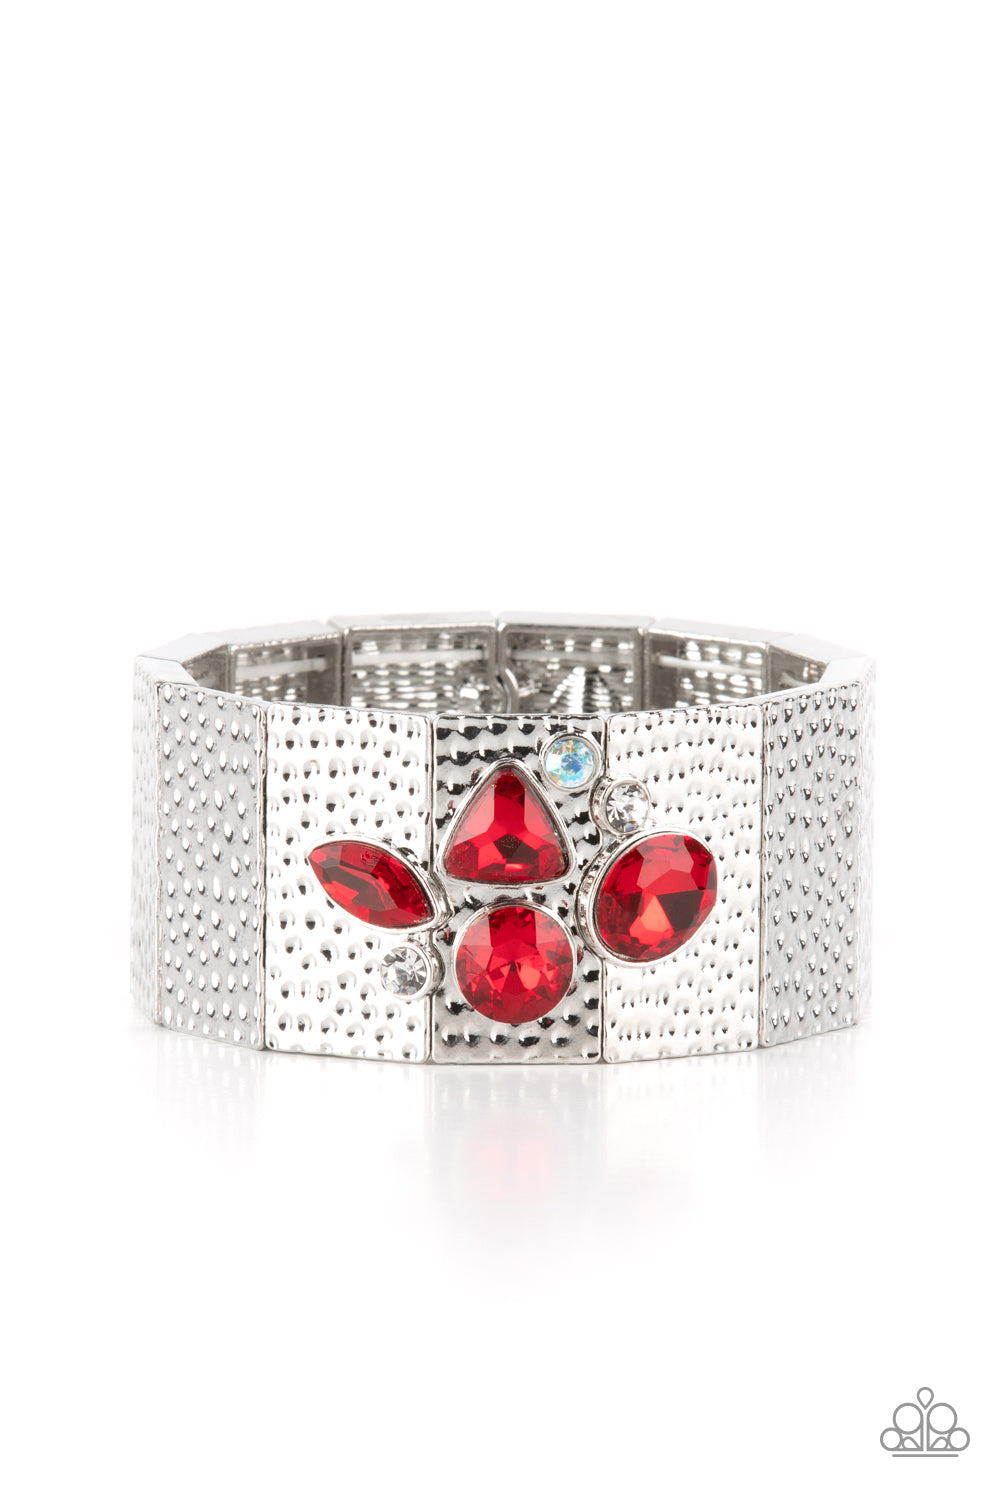 Flickering Fortune Red Bracelet - Paparazzi Accessories  Hammered in gritty shimmer, rustic, rectangular, silver frames are threaded along stretchy bands that wrap around the wrist. Mismatched white, iridescent, and red rhinestones cluster on the front and back of the piece, creating dueling centerpieces. Due to its prismatic palette, color may vary.  Sold as one individual bracelet.